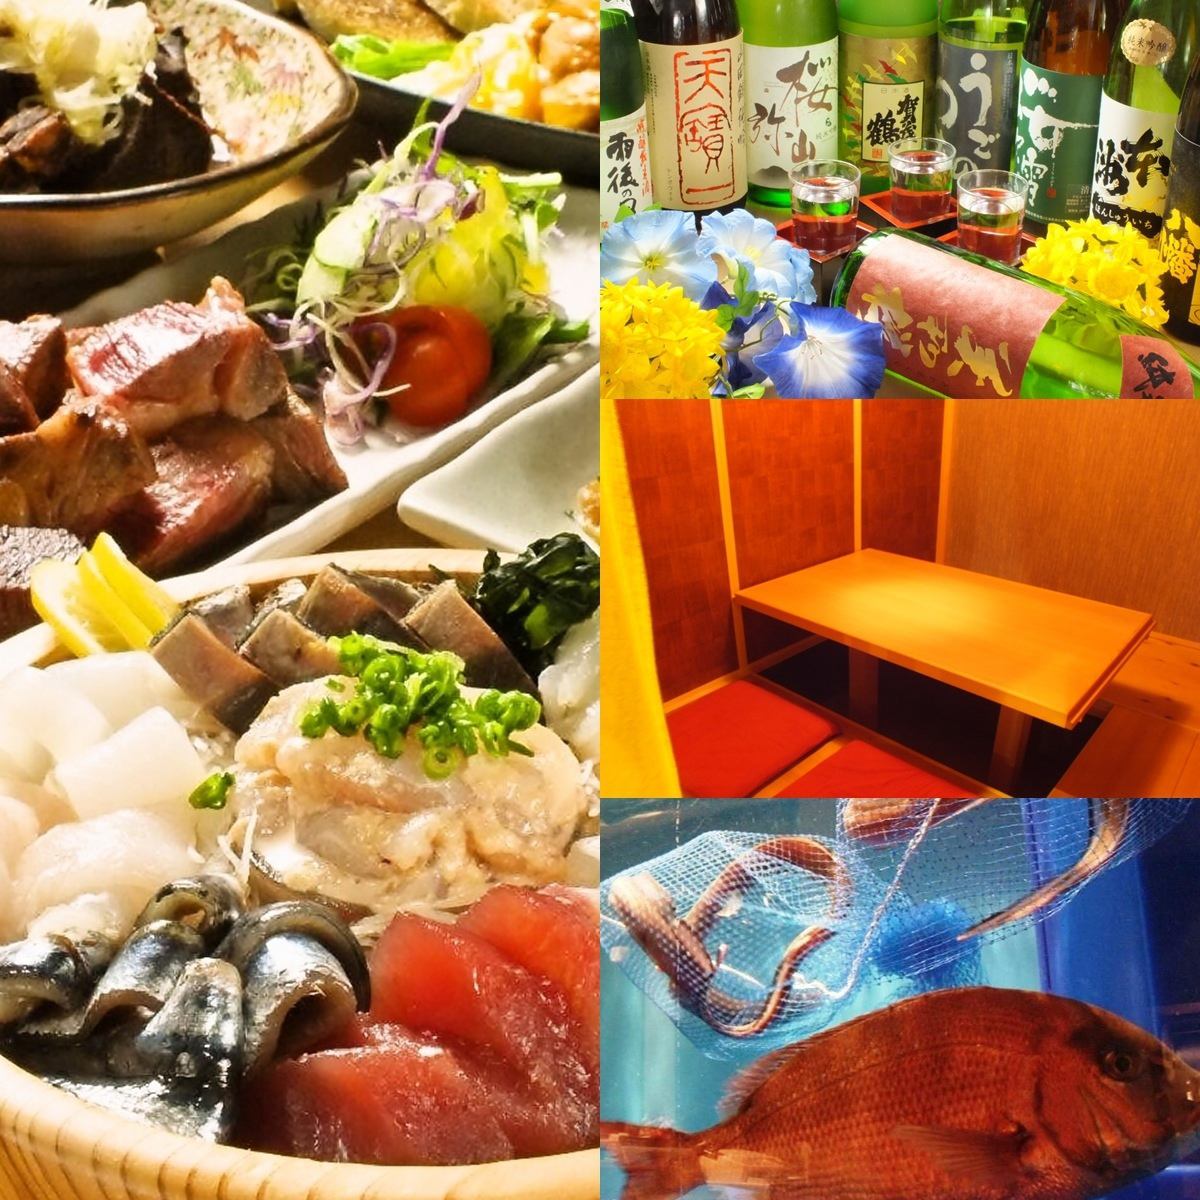 We offer a wide selection of fresh Setouchi seafood from our in-store aquarium and local Hiroshima sake.